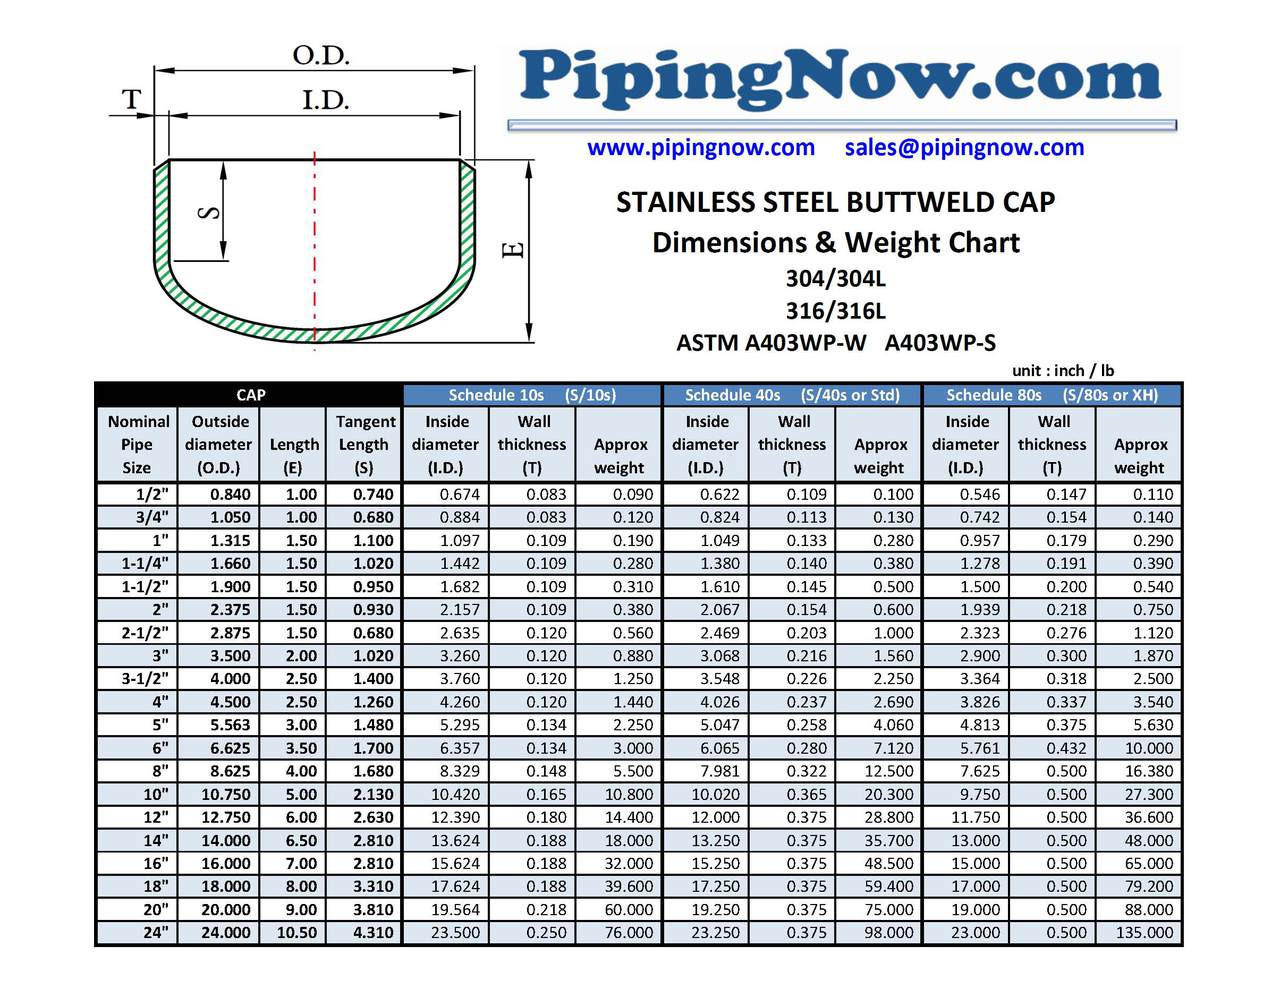 Stainless Steel Buttweld Fitting 6 Cap Schedule 40 304/304L A403WP-W